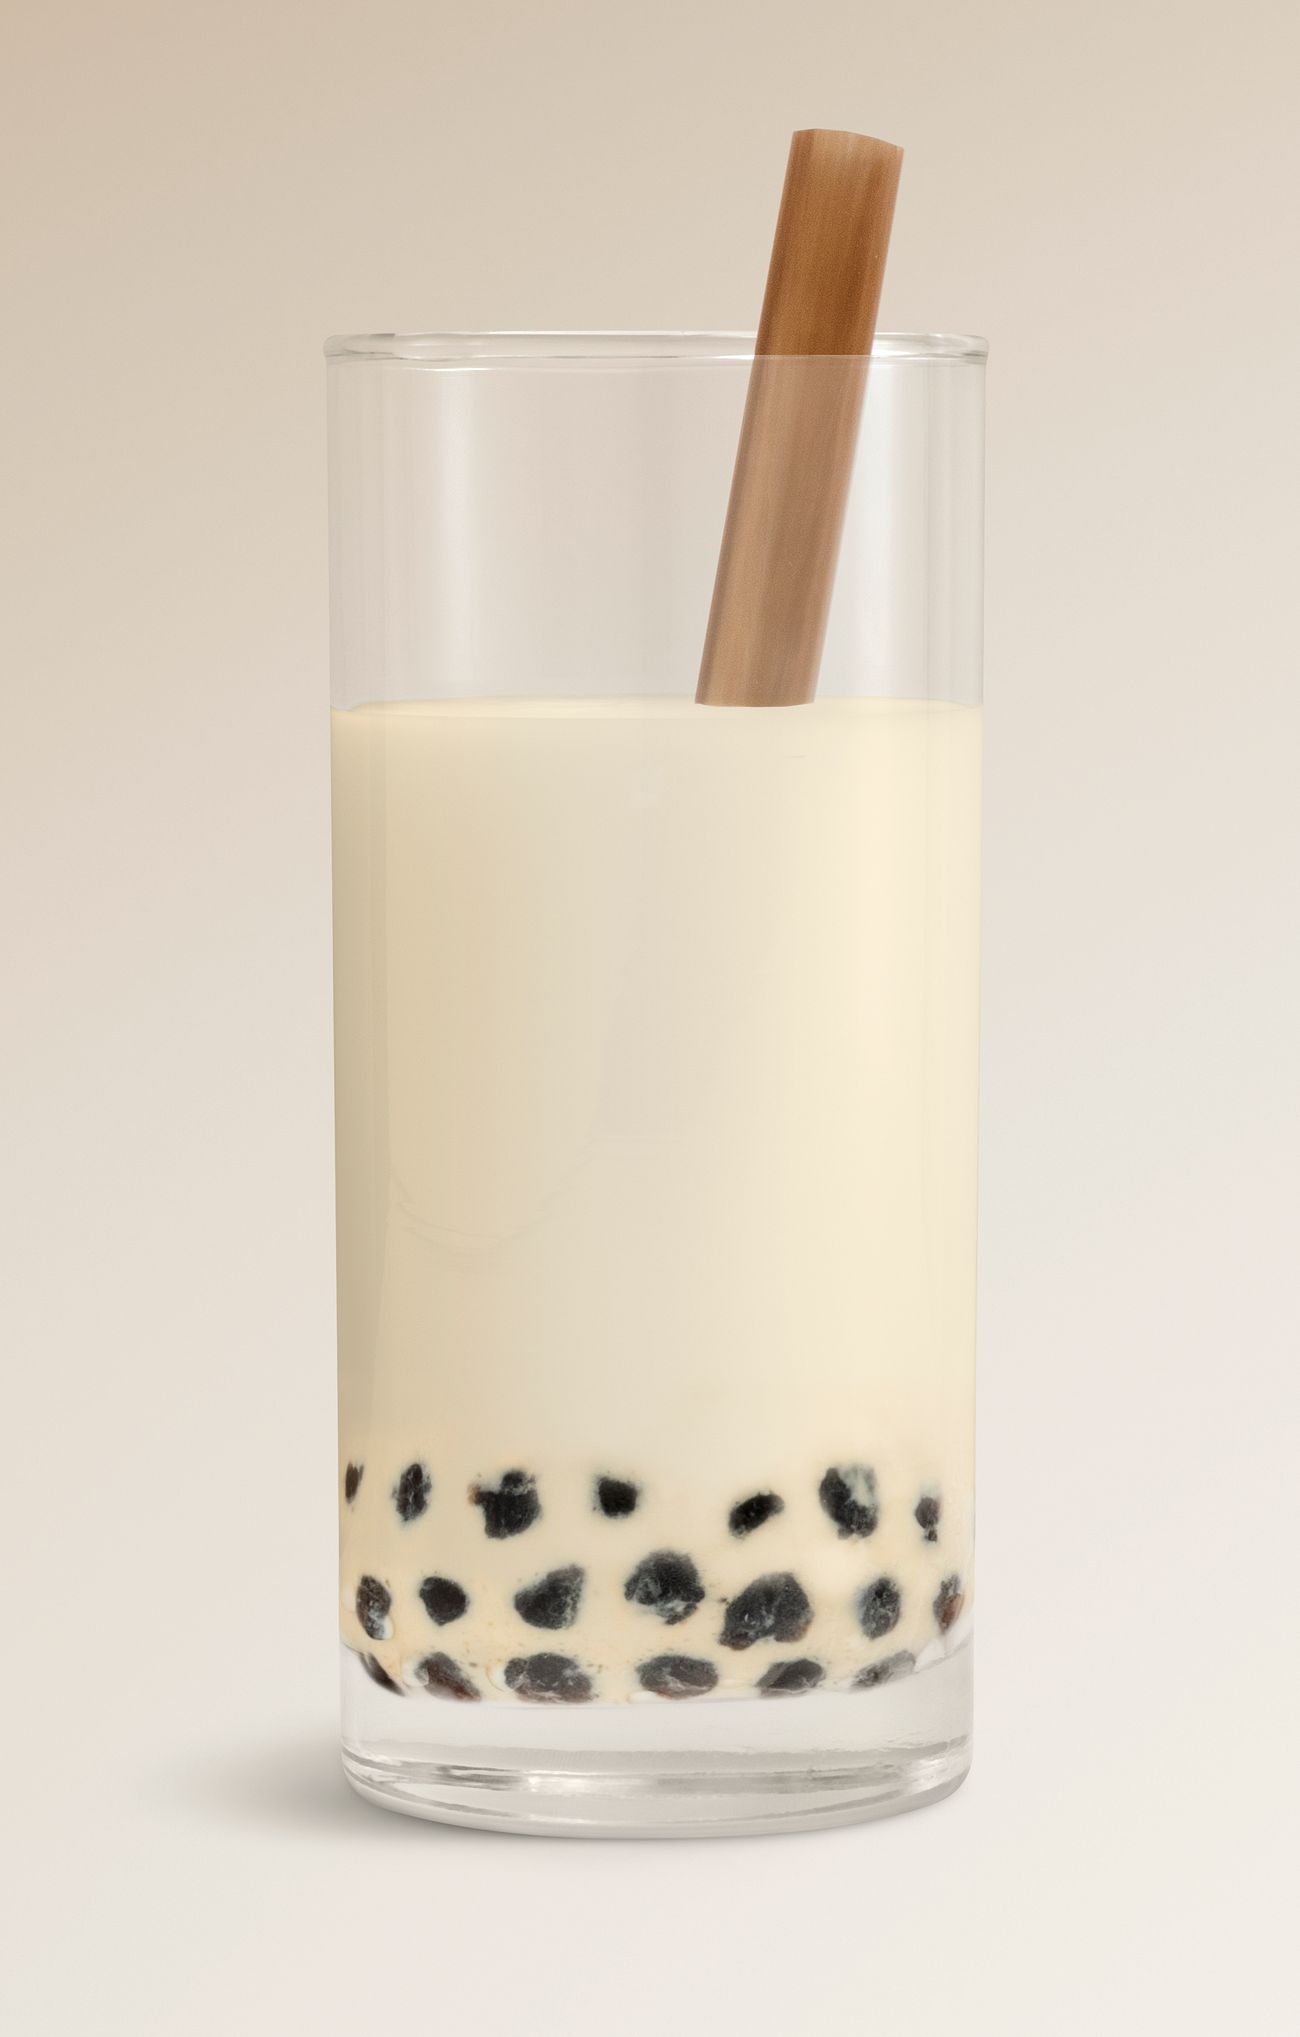 Download Bubble milk tea in a glass design resource | Royalty free psd mockup - 2382289